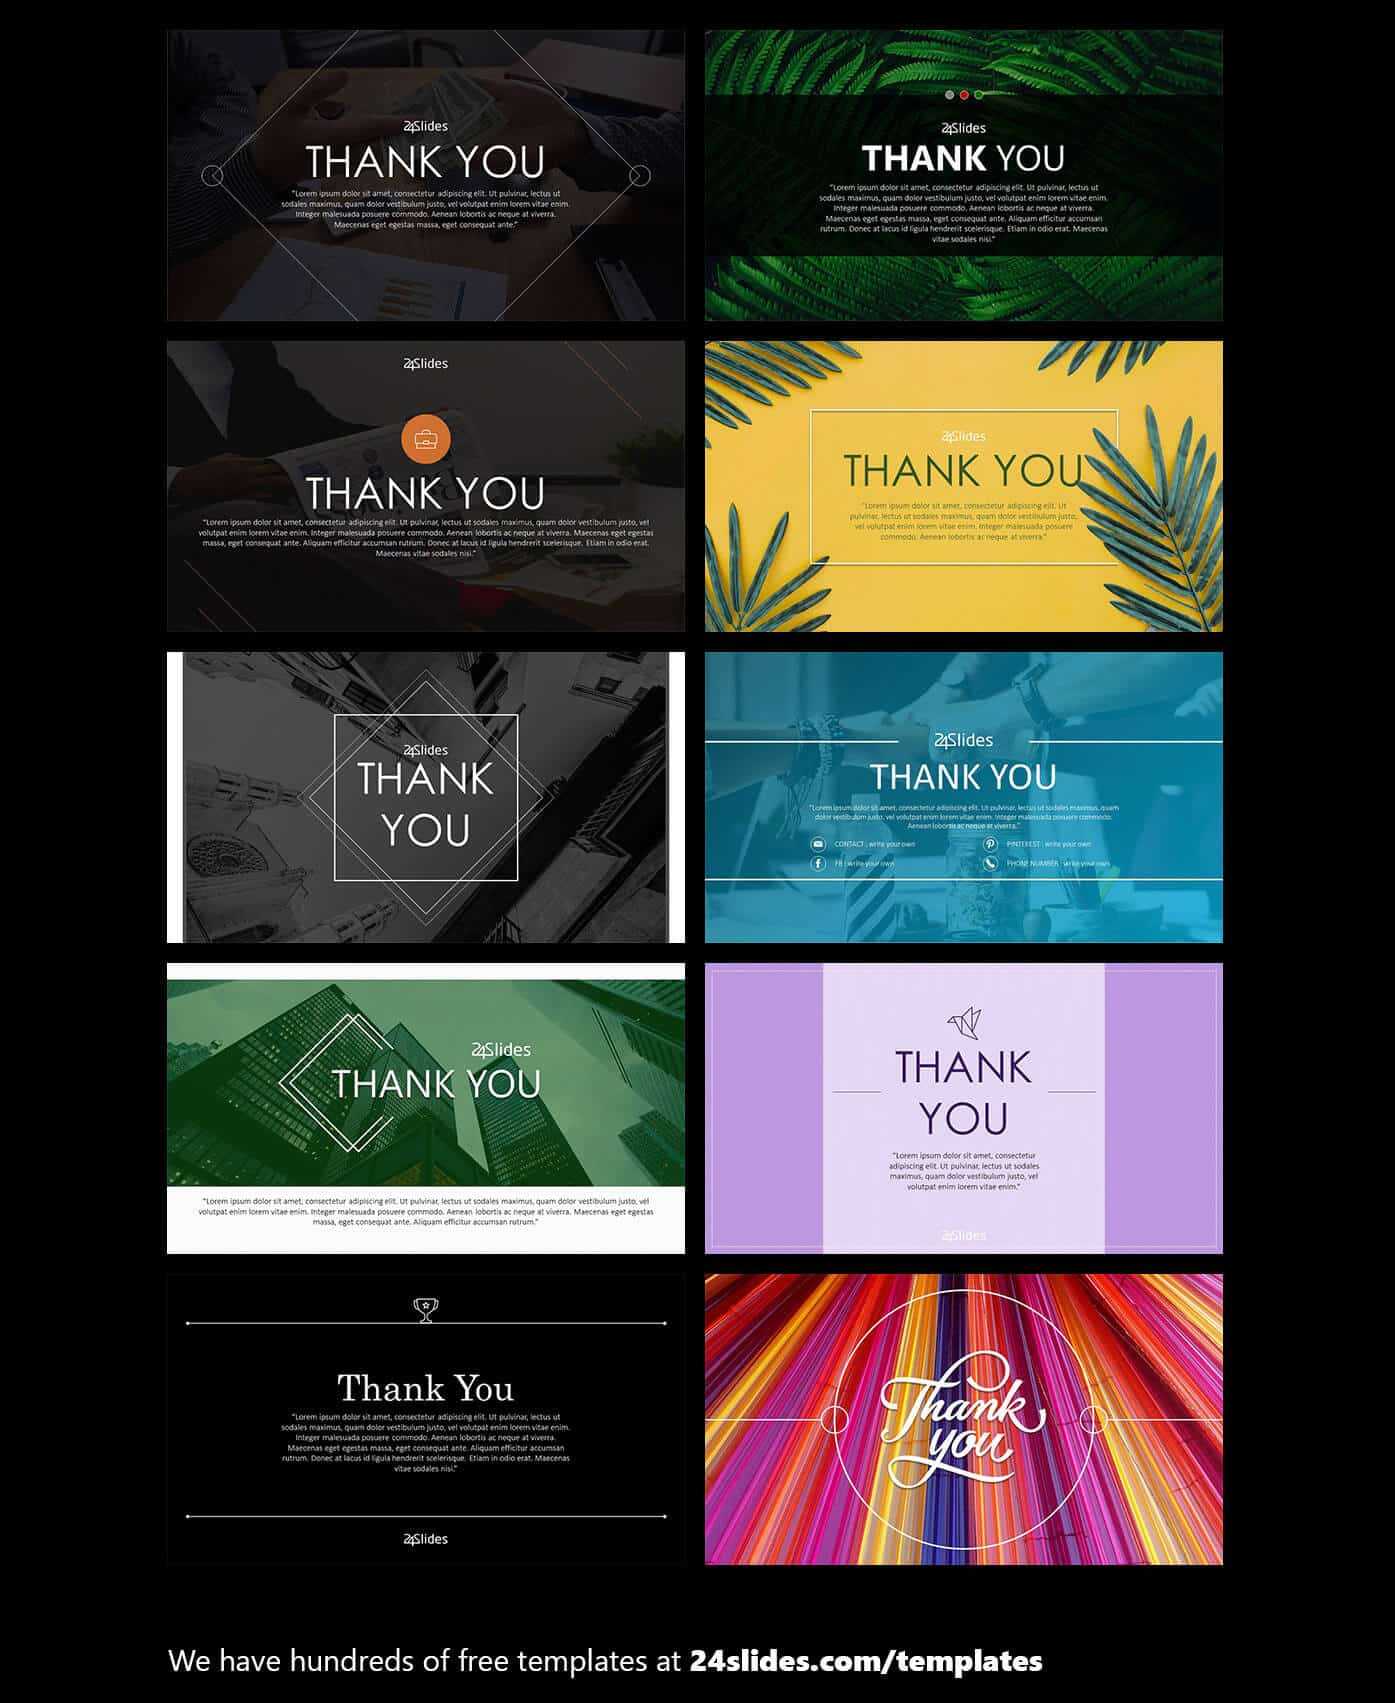 15 Fun And Colorful Free Powerpoint Templates | Present Better With Powerpoint Photo Slideshow Template